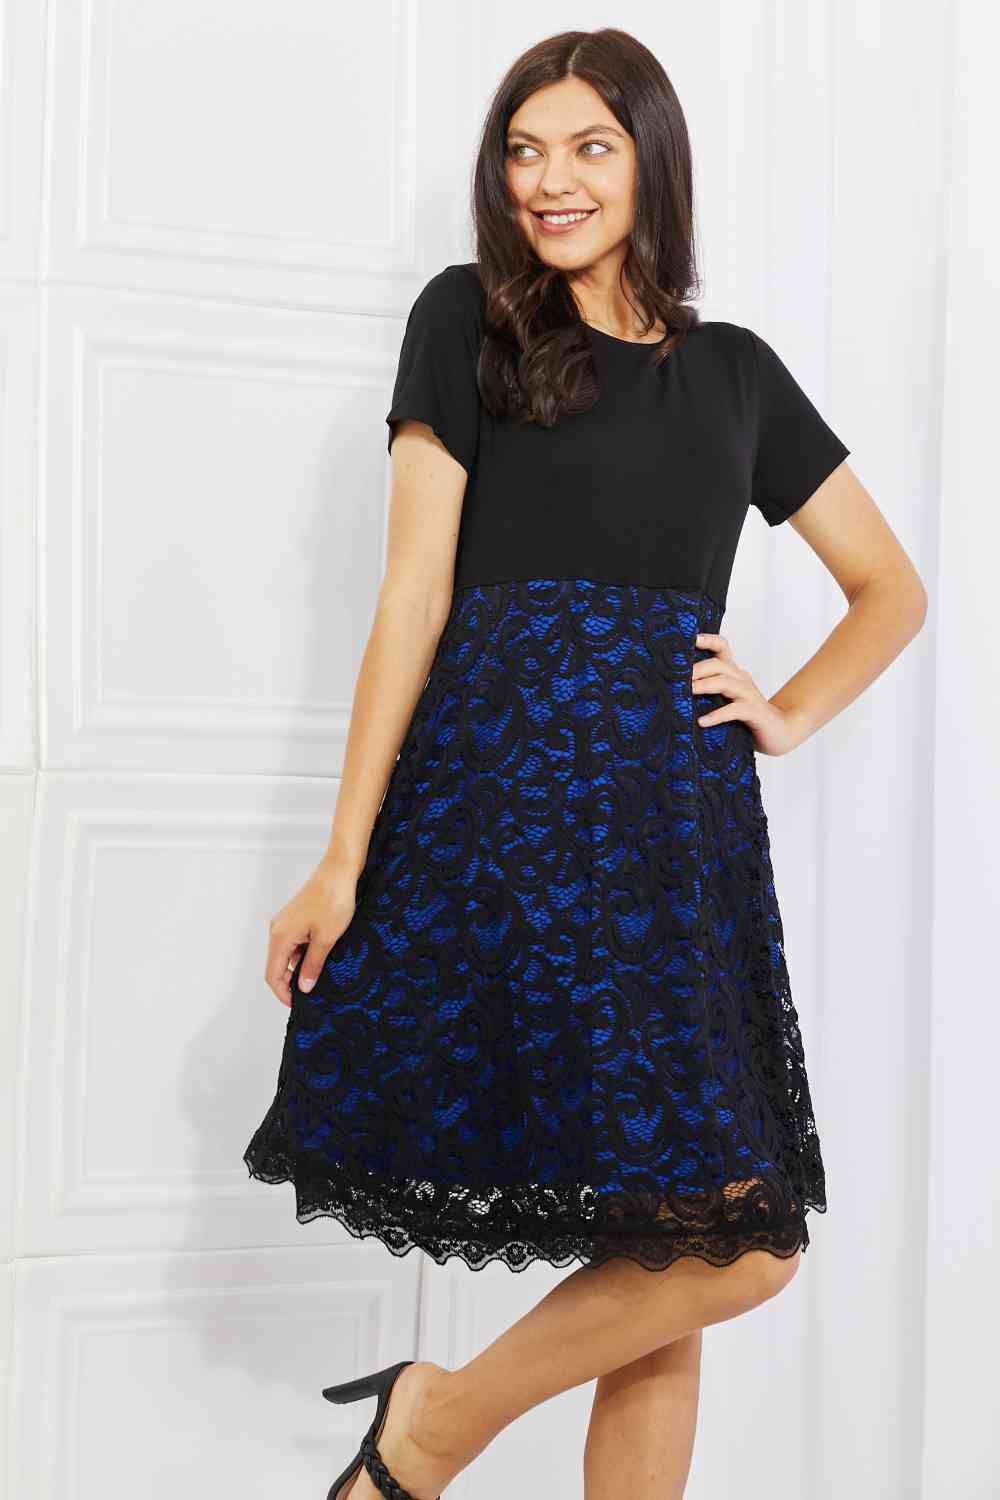 Black and Blue All Overlay Dress